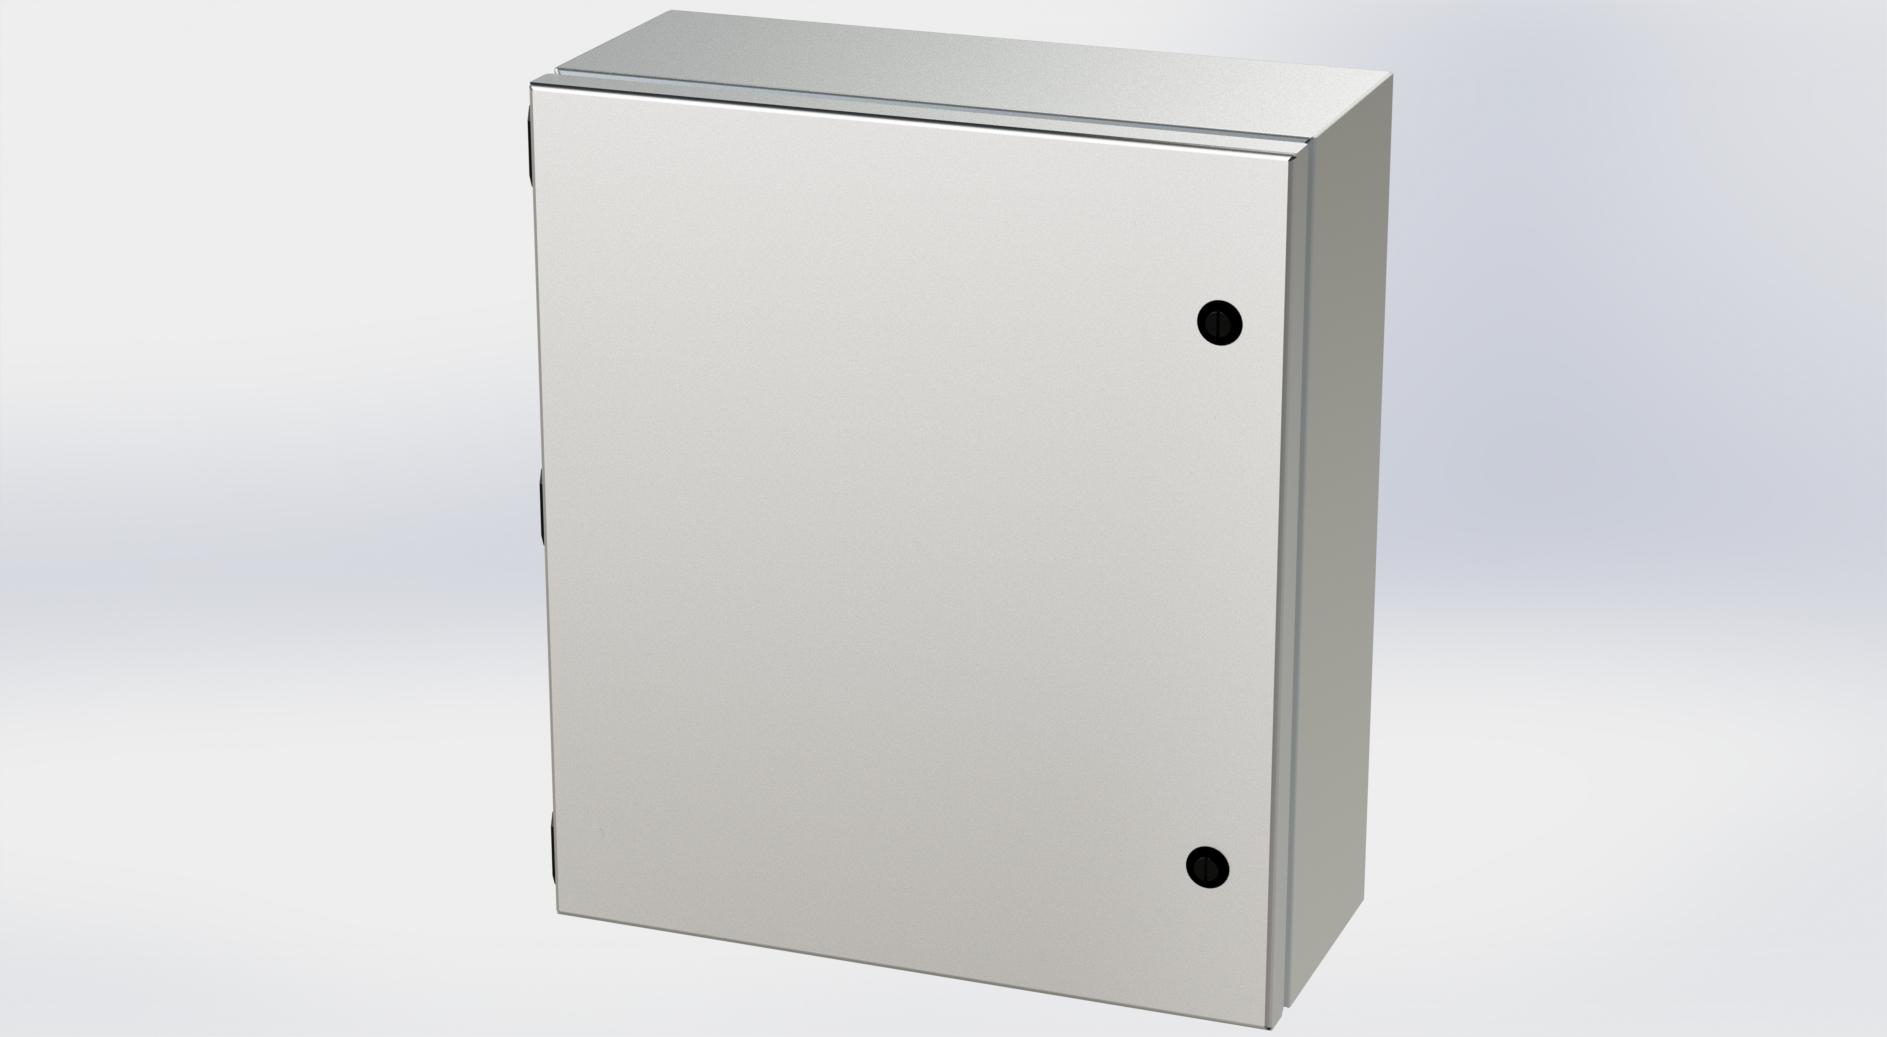 Saginaw Control SCE-1614ELJSS6 S.S. ELJ Enclosure, Height:16.00", Width:14.00", Depth:6.00", #4 brushed finish on all exterior surfaces. Optional sub-panels are powder coated white.